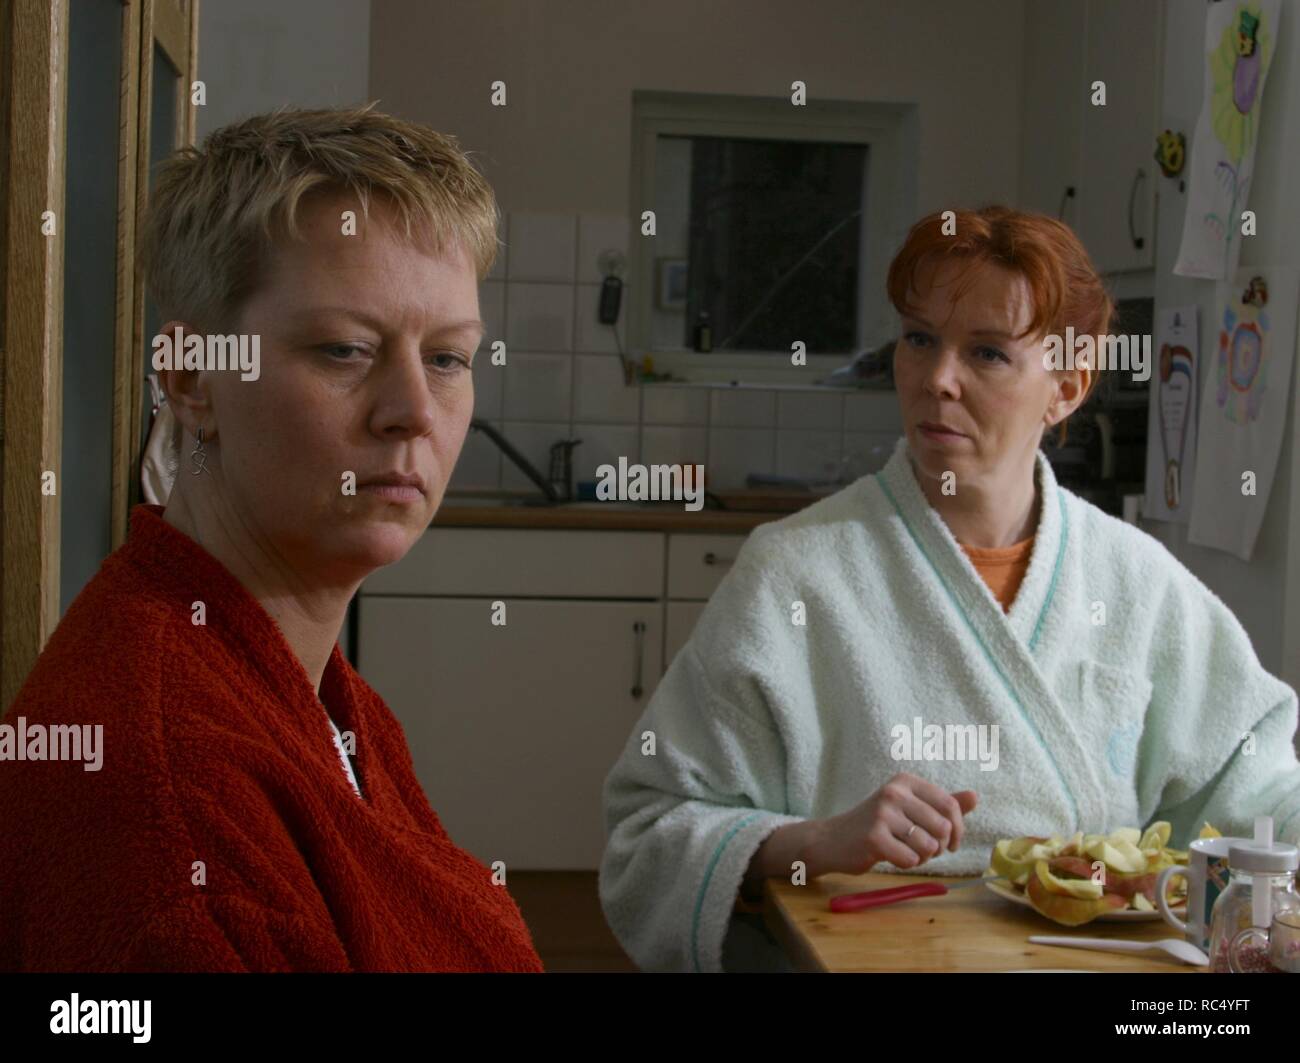 Two adult women sit at table in housecoat and discuss or argue at home. Stock Photo